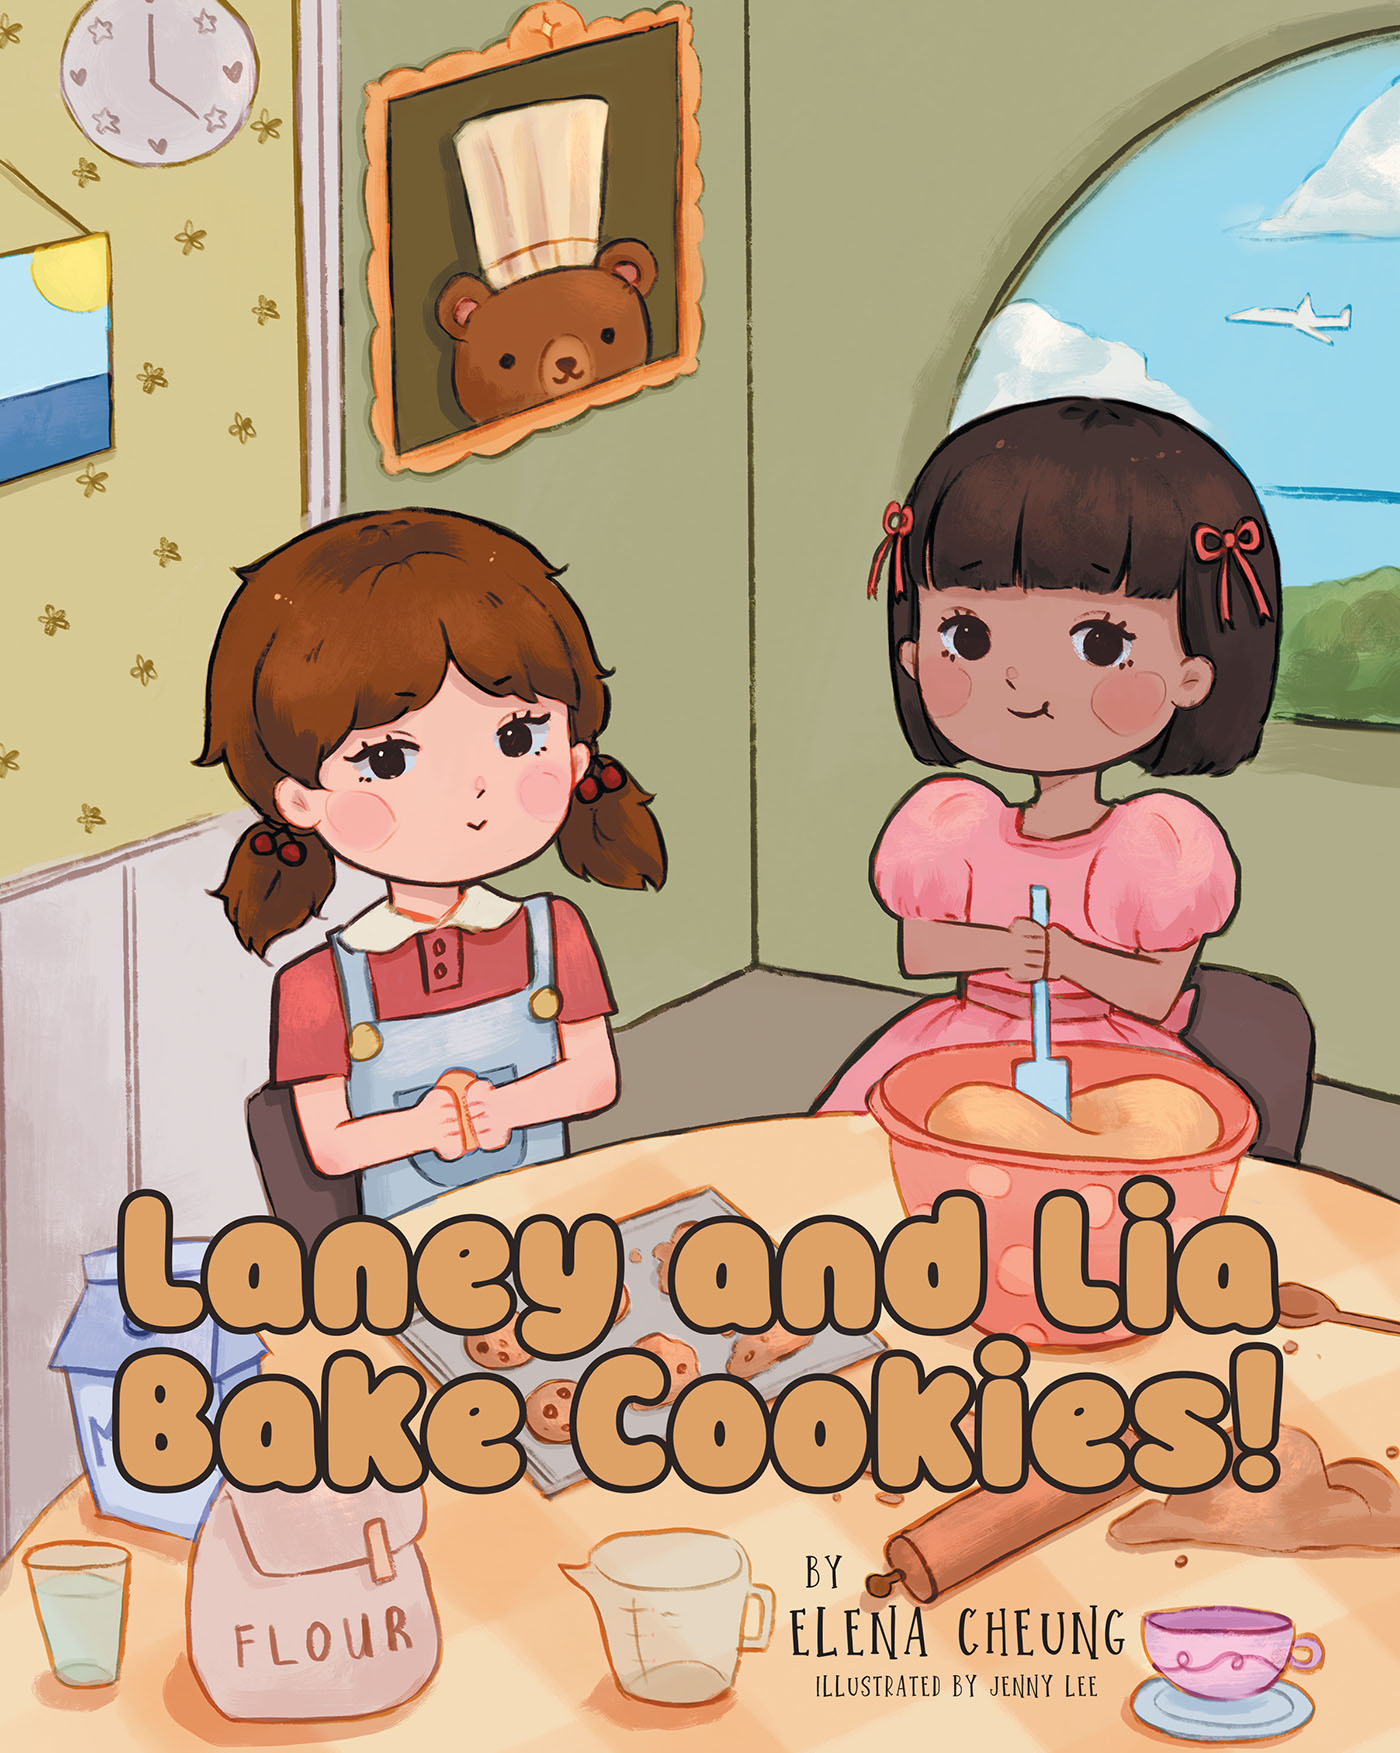 Author Elena Cheung’s New Book, "Laney and Lia Bake Cookies!" is a Charming Children’s Story About Two Sisters Who Are Complete Opposites But Work Perfectly Together